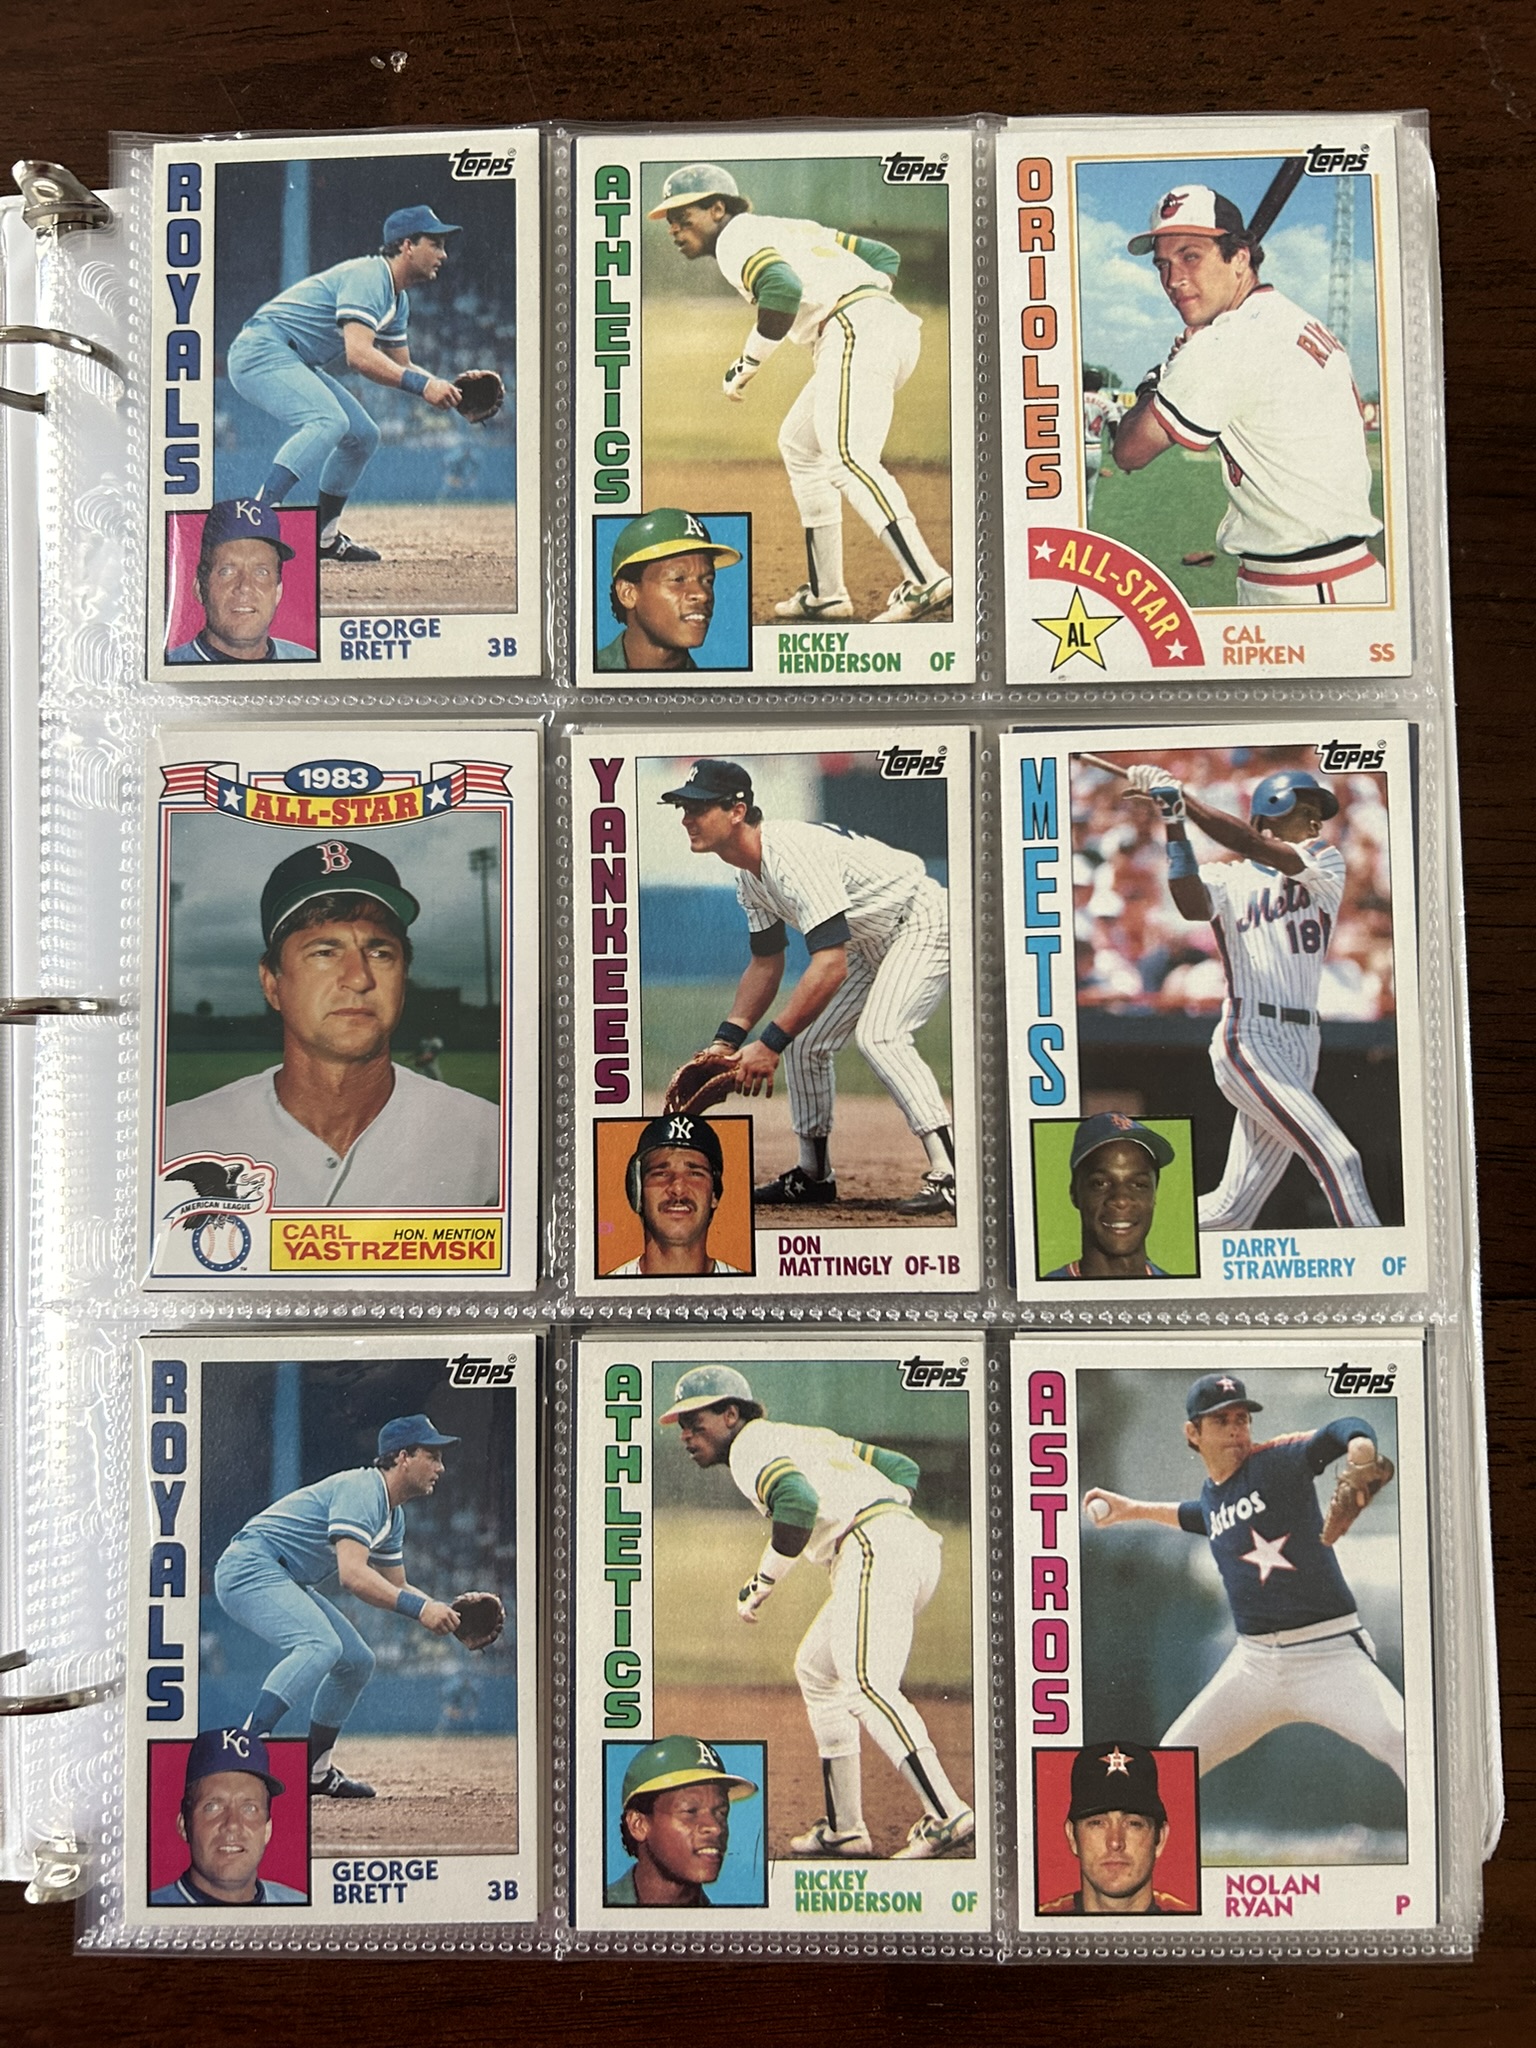 1984-Topps-Baseball-Cards-Over-250-Cards-Including-Don-Mattingly-Darryl- Strawberry-Rookies